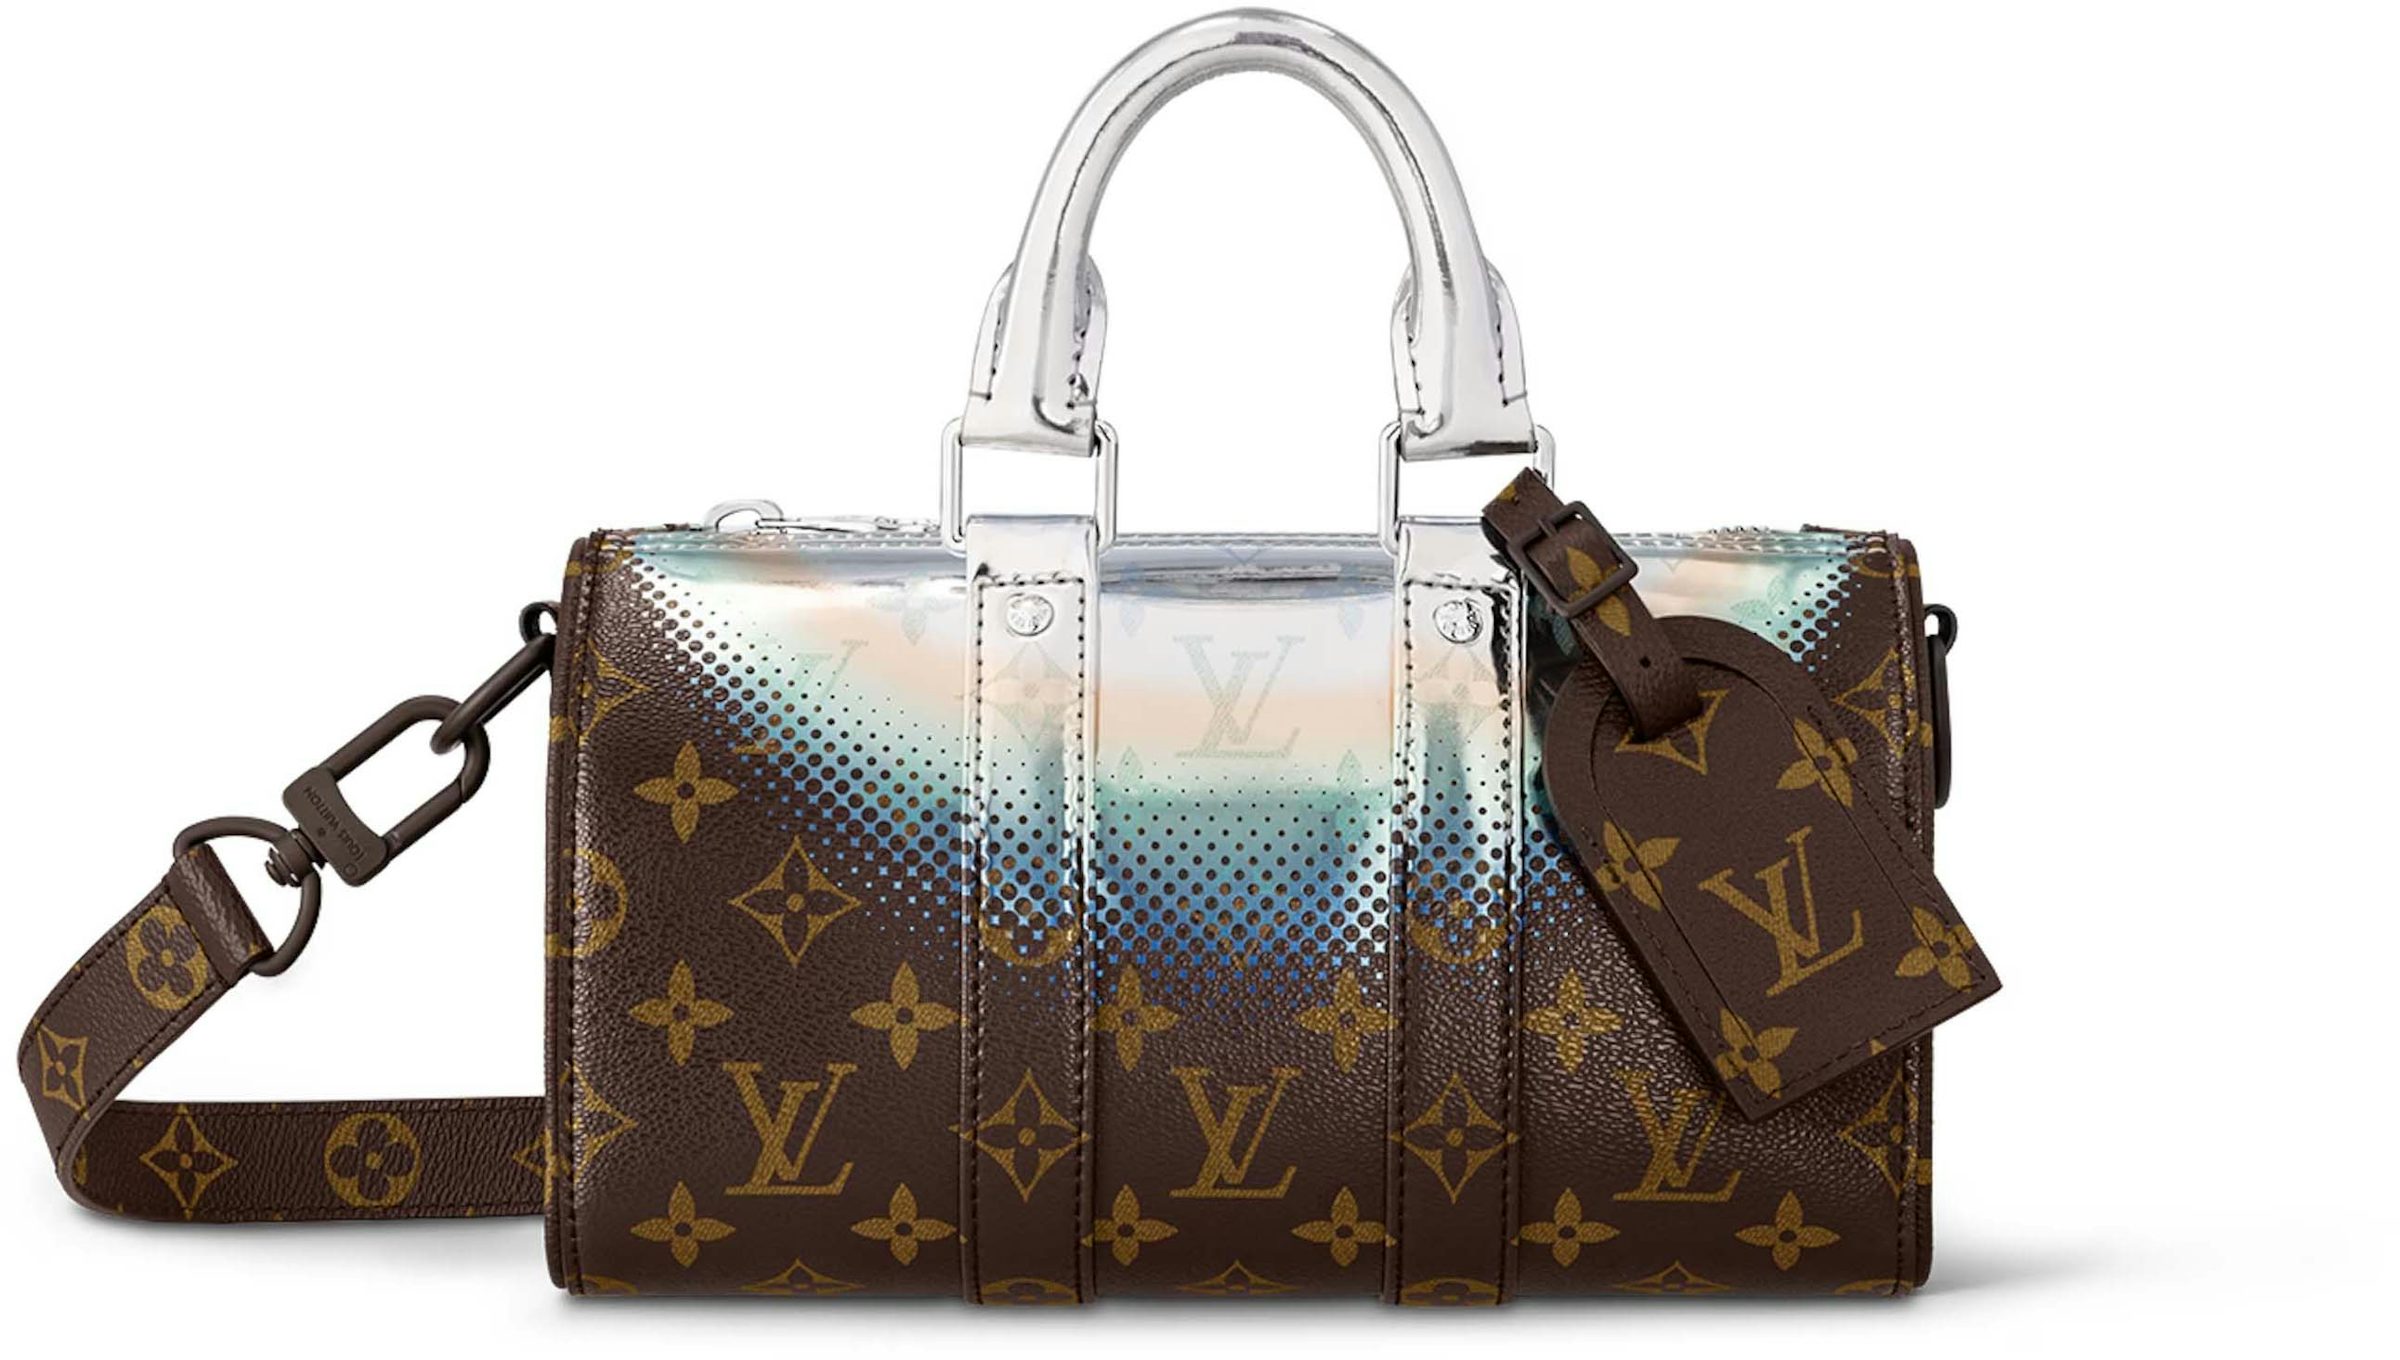 Louis Vuitton Keepall Bandouliere 25 Mineral Gray in Embossed